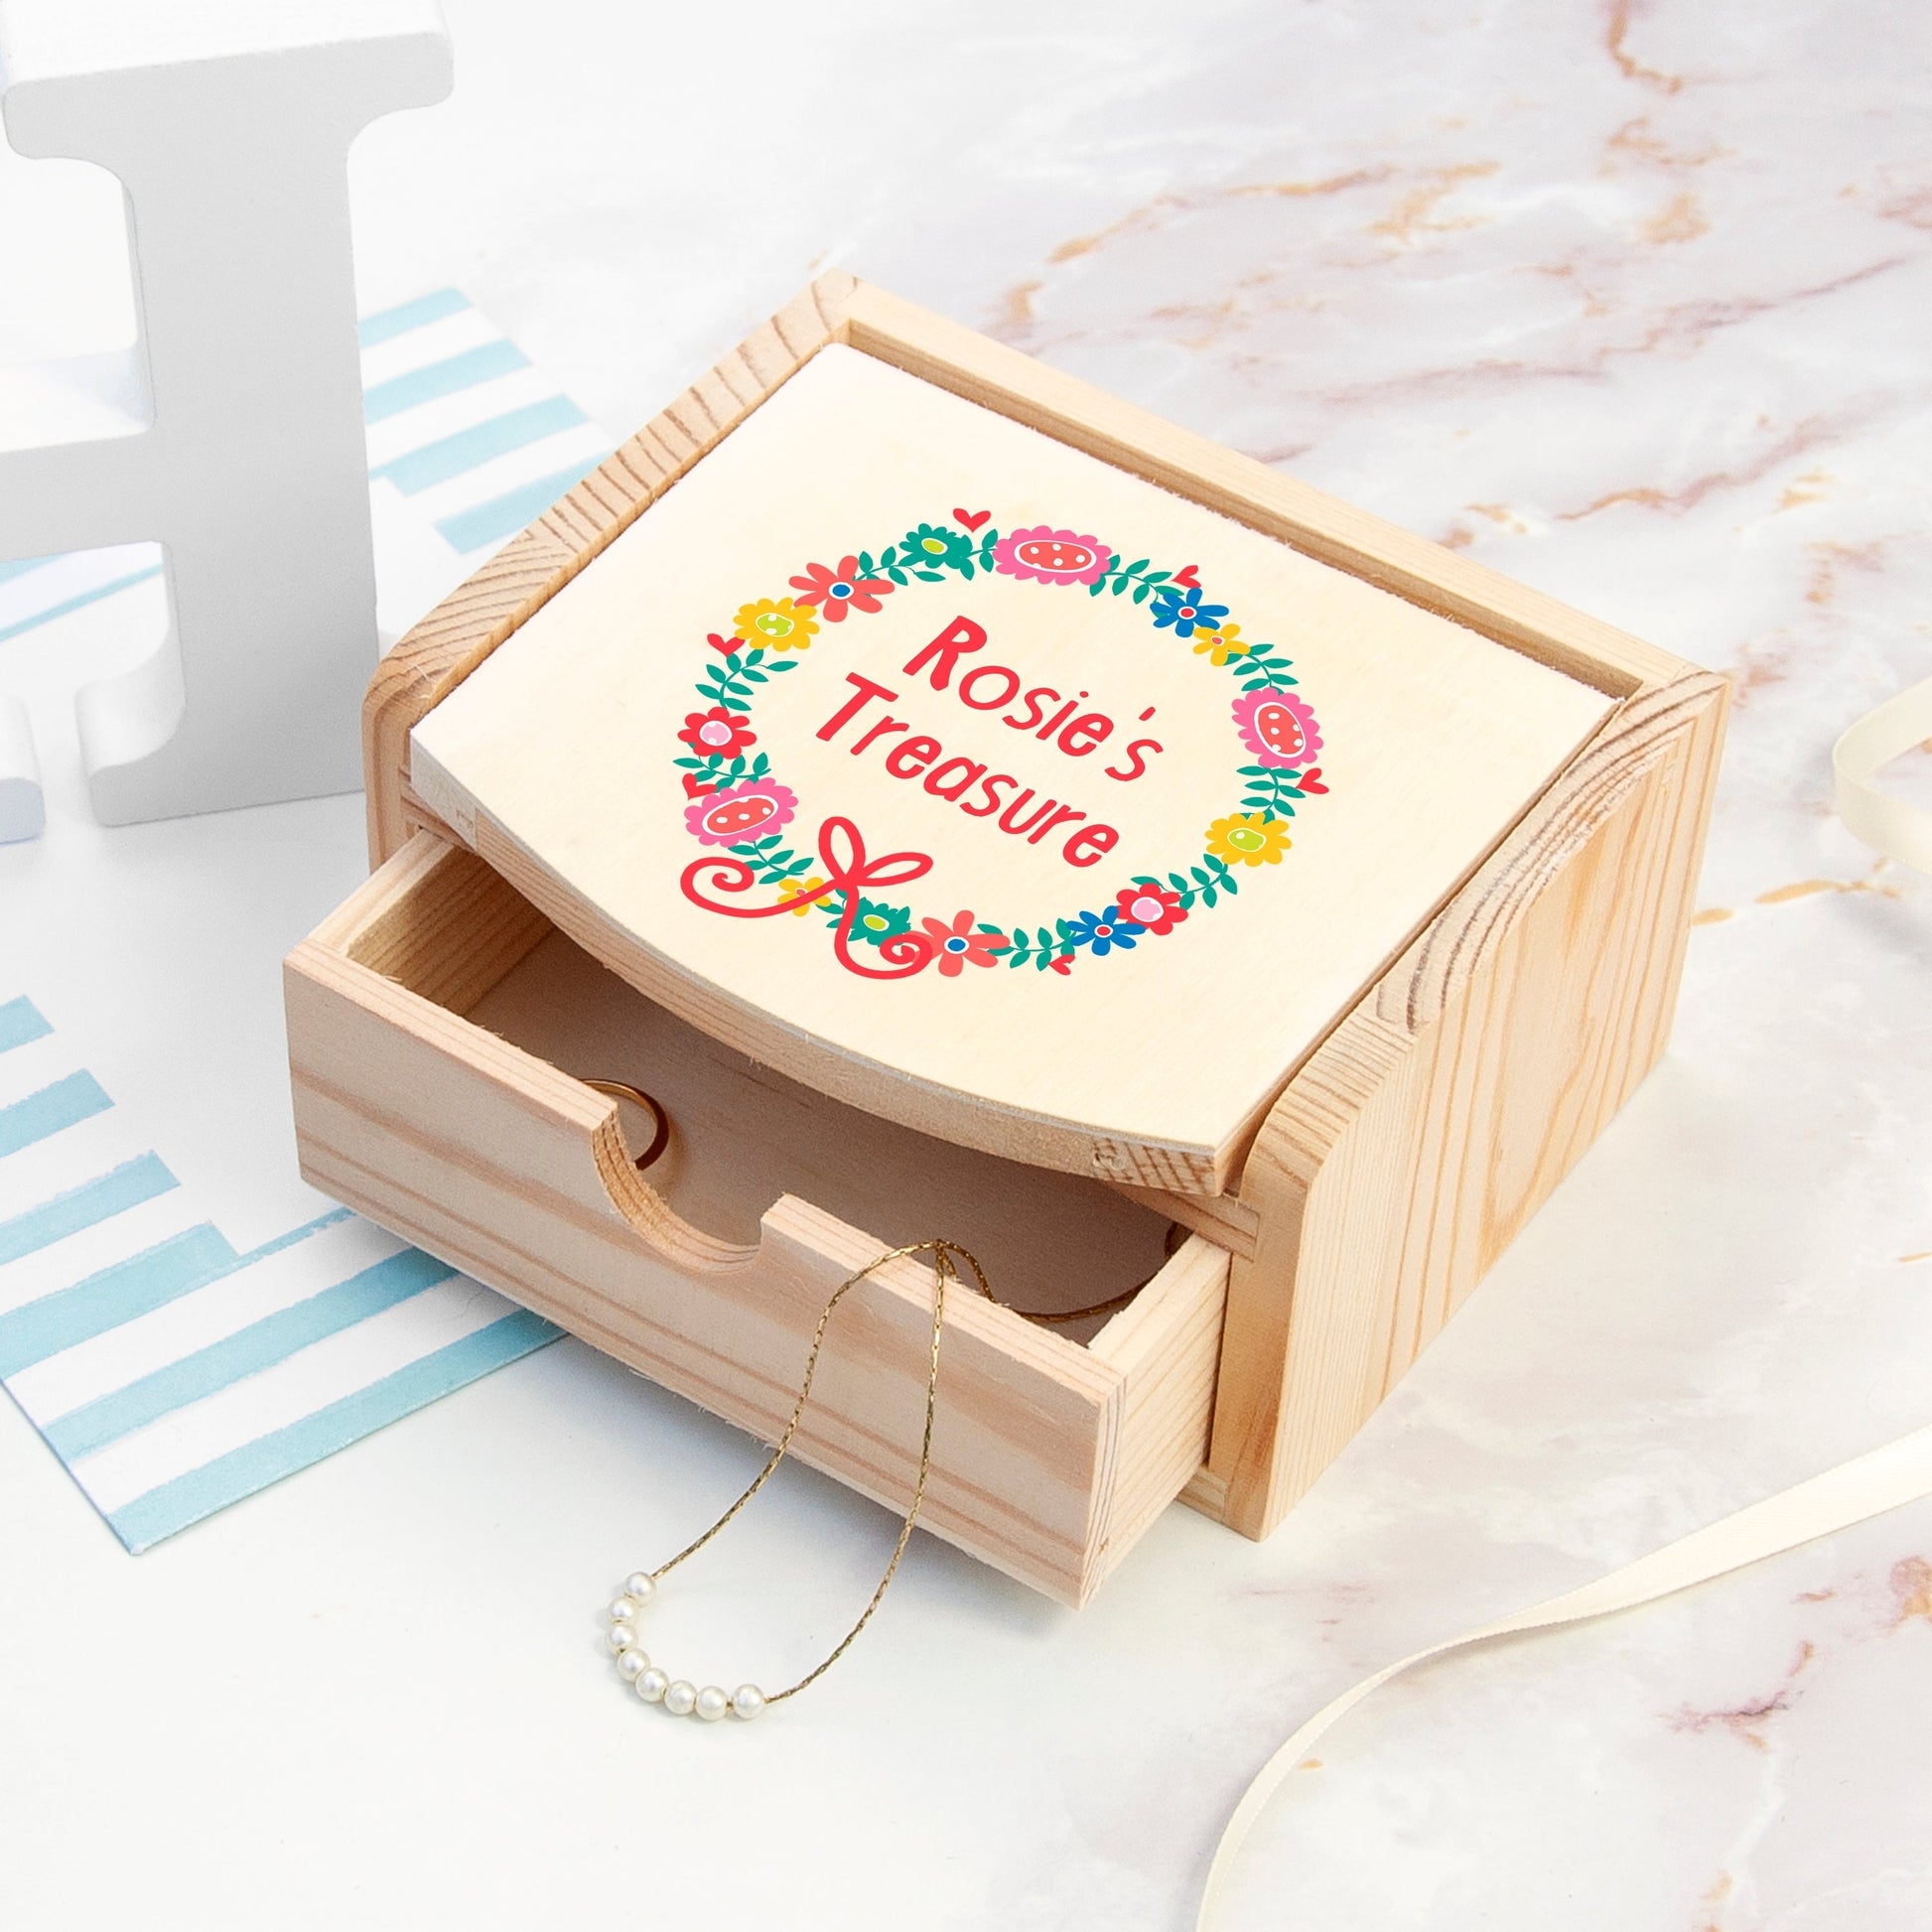 Personalized Jewellery Boxes & Storage - Personalized Kid’s Floral Garland Jewellery Box 